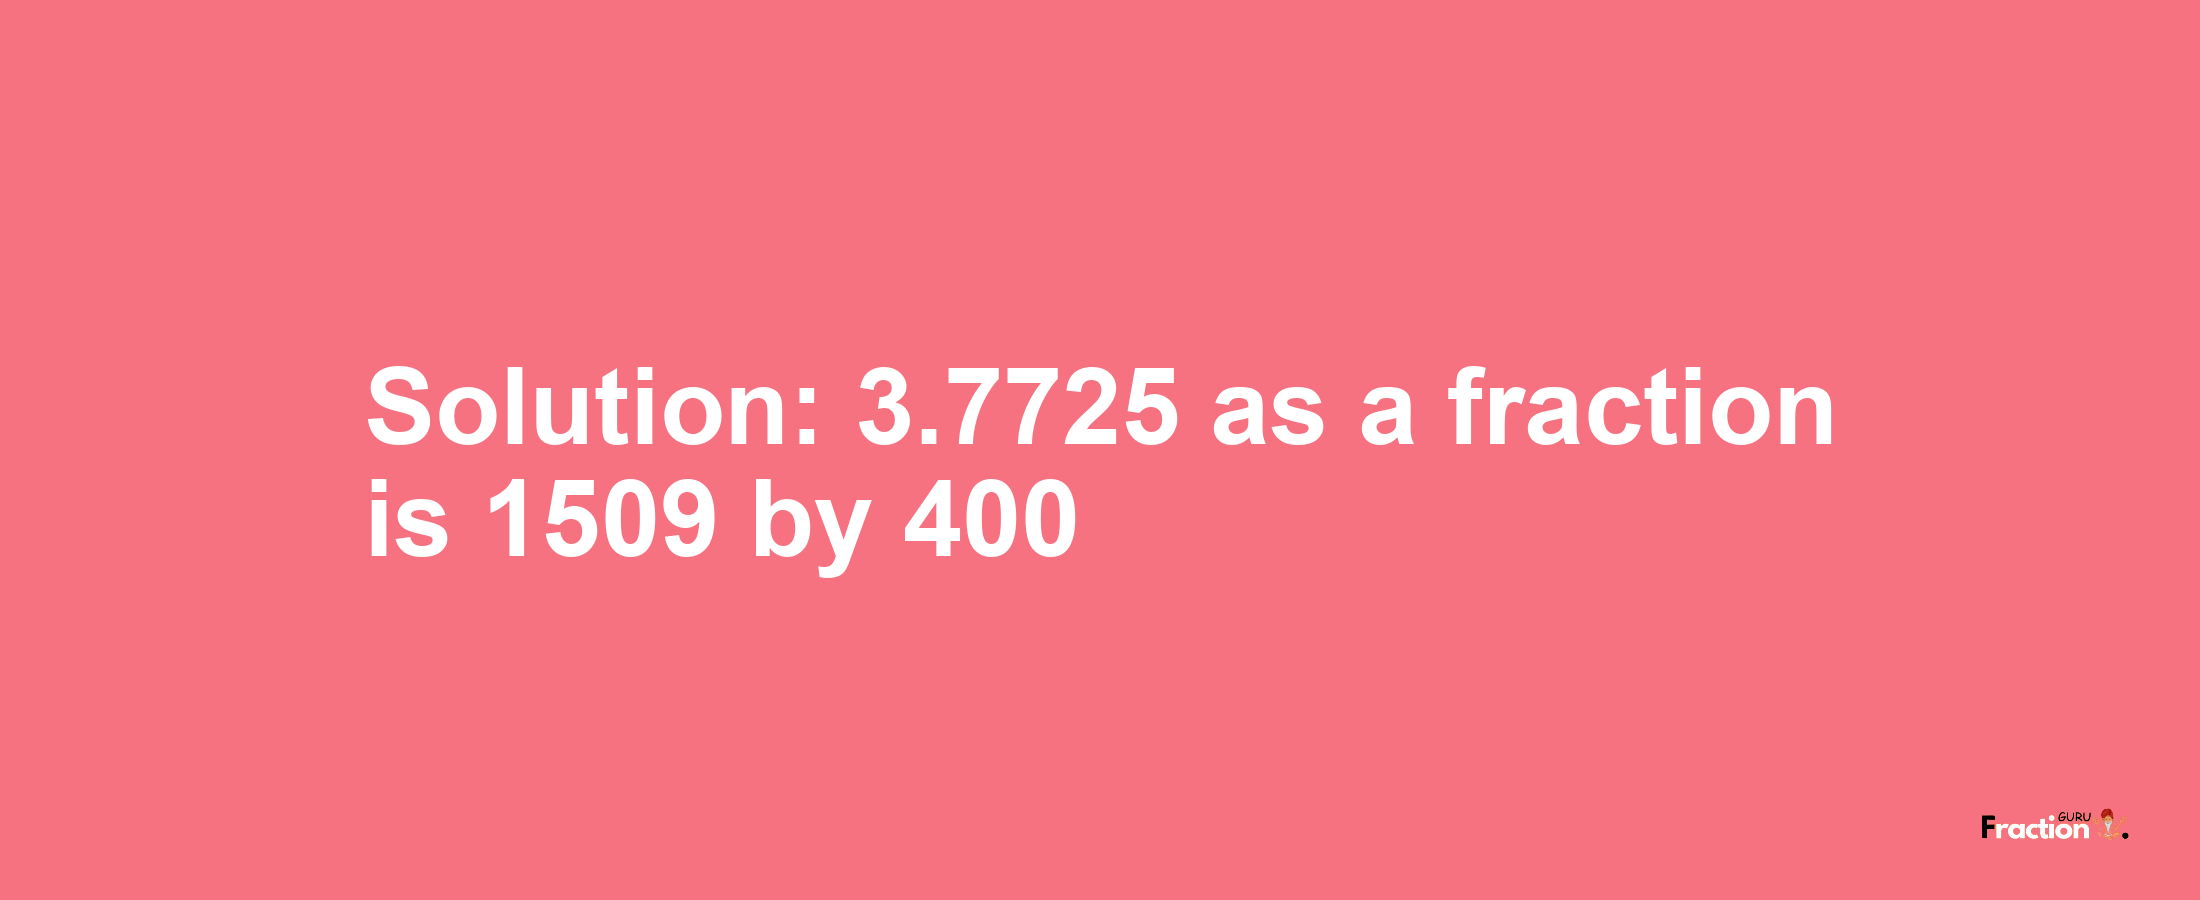 Solution:3.7725 as a fraction is 1509/400